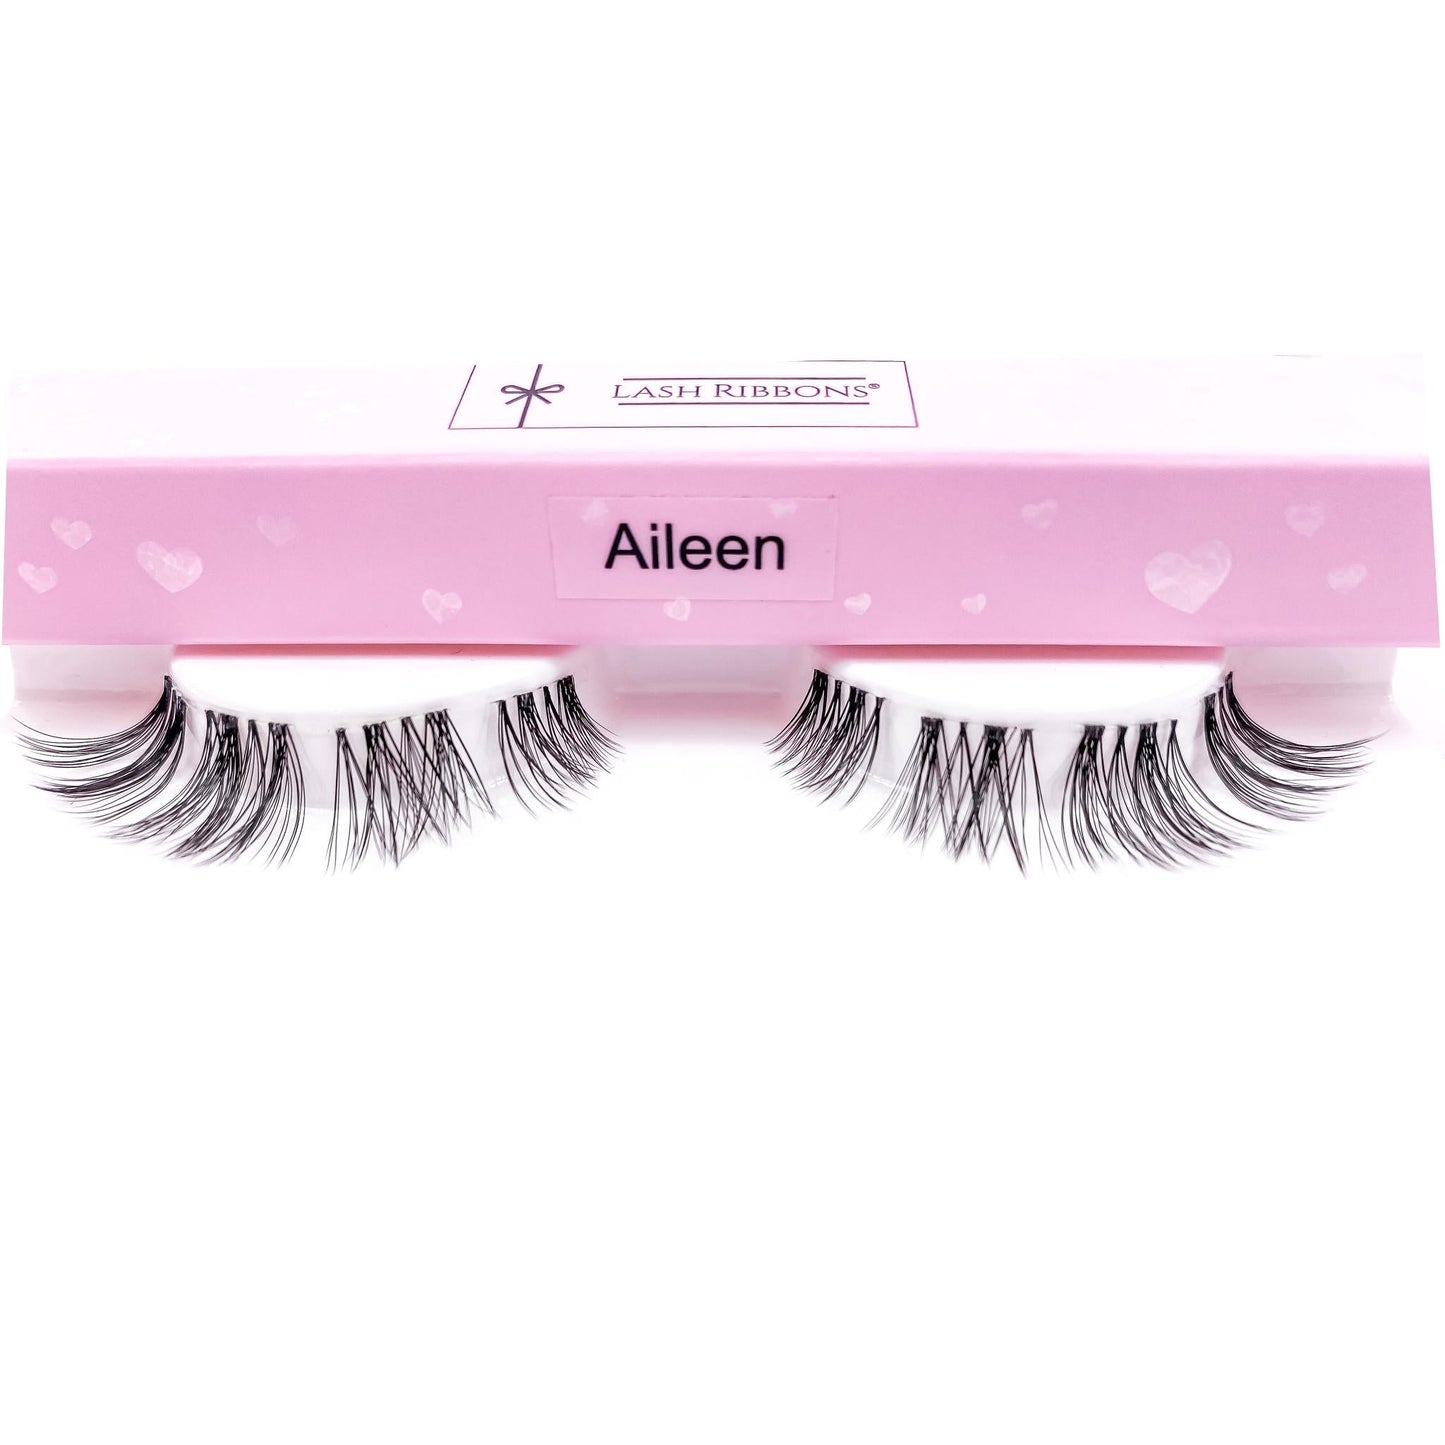 Pre-Styled Lash Ribbons® Starter Kit (With Ultimate Bond)